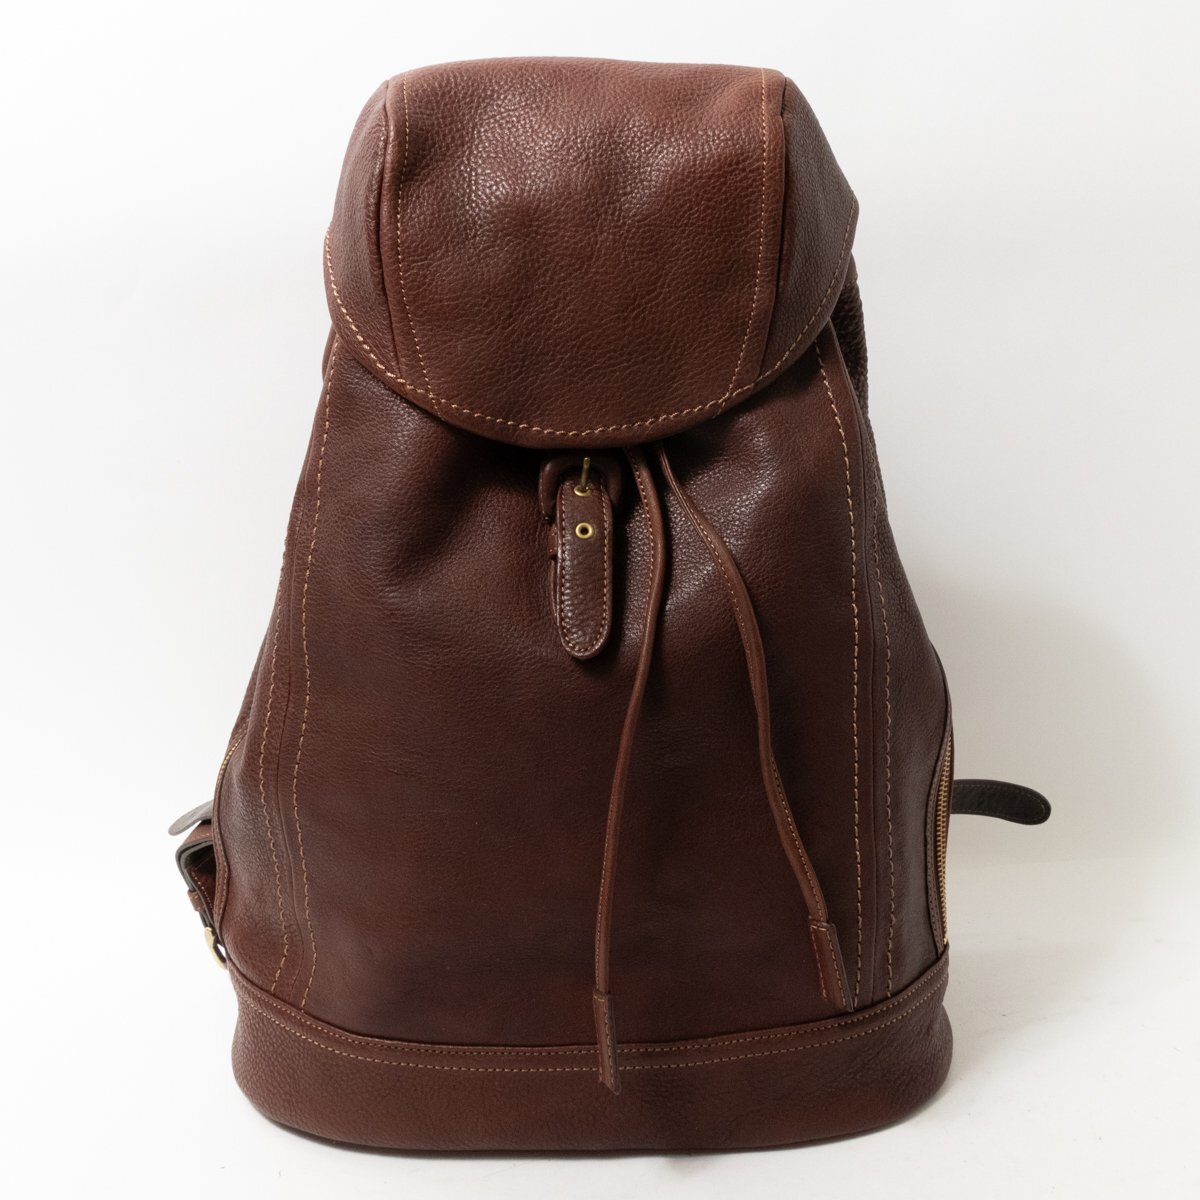 [1 jpy start ] earth shop bag manufacture place TSUCHIYA KABAN pouch type rucksack backpack leather original leather dark brown hook opening and closing casual bag 